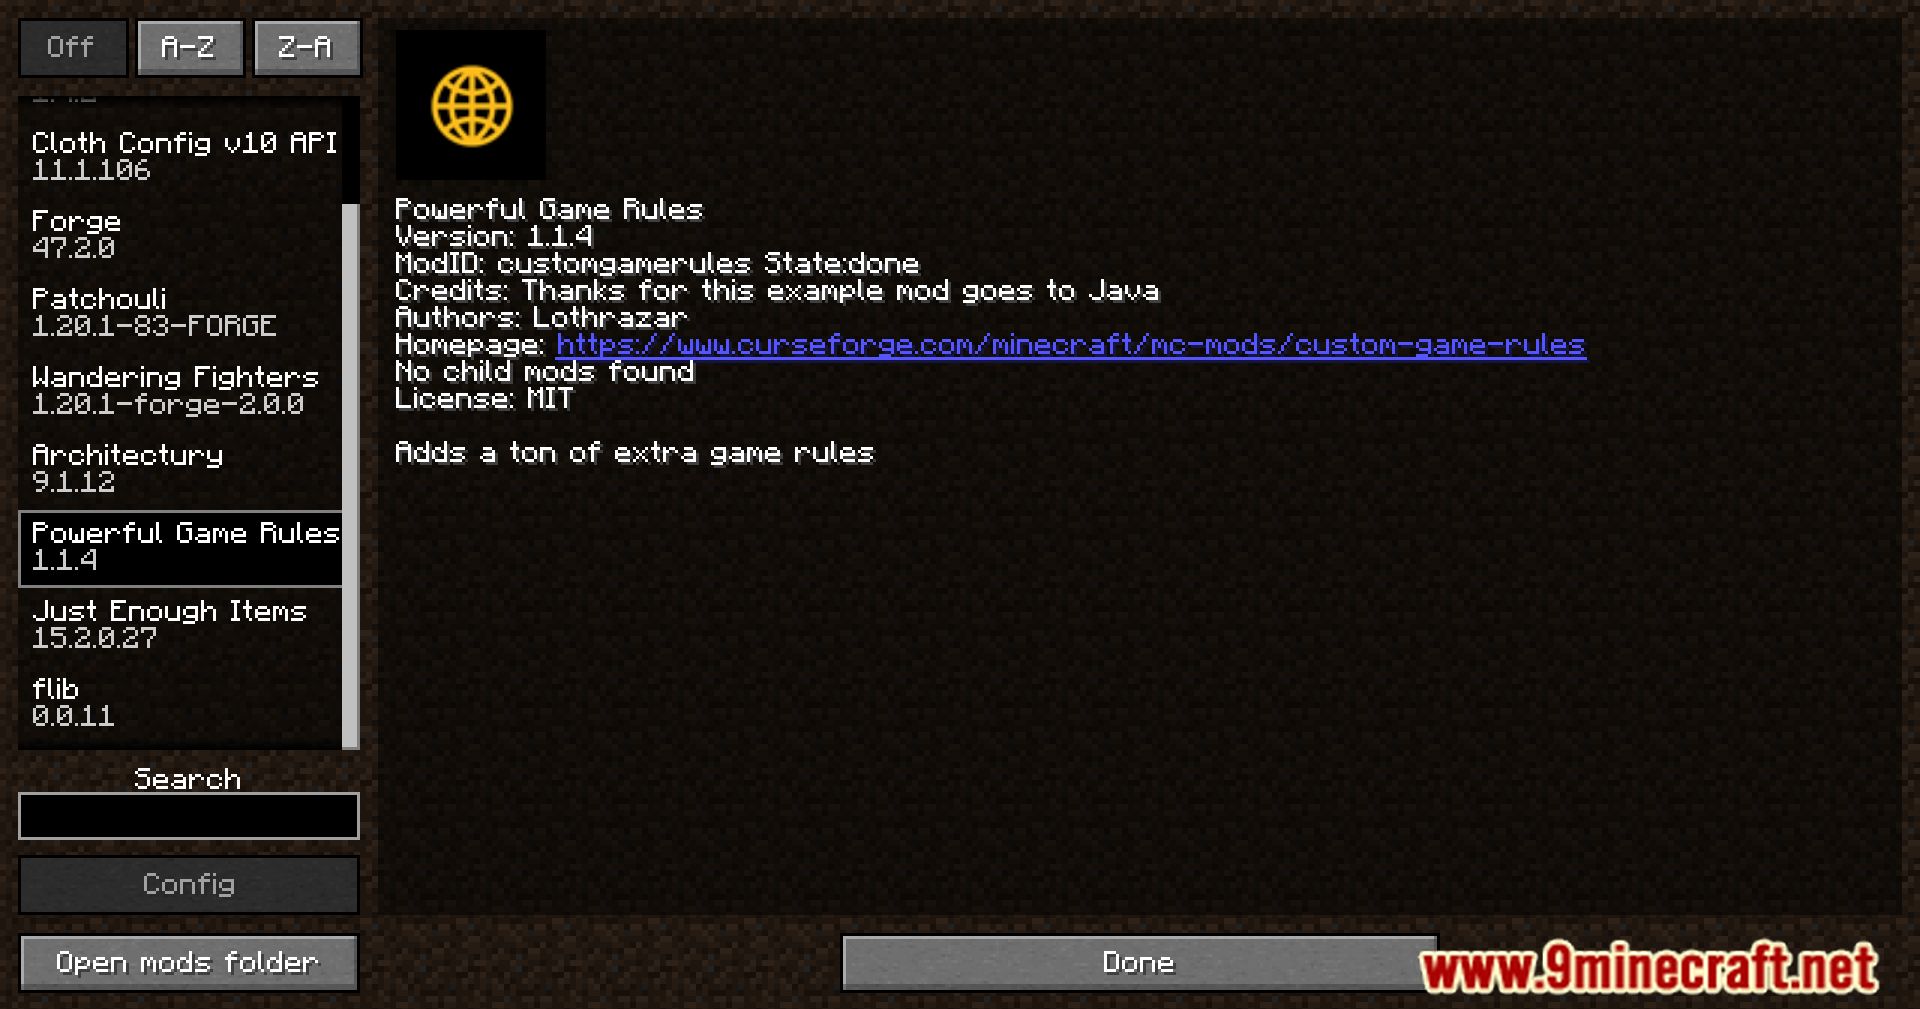 More Powerful Game Rules Mod (1.20.1, 1.19.4) - Your Minecraft, Your Rules! 2